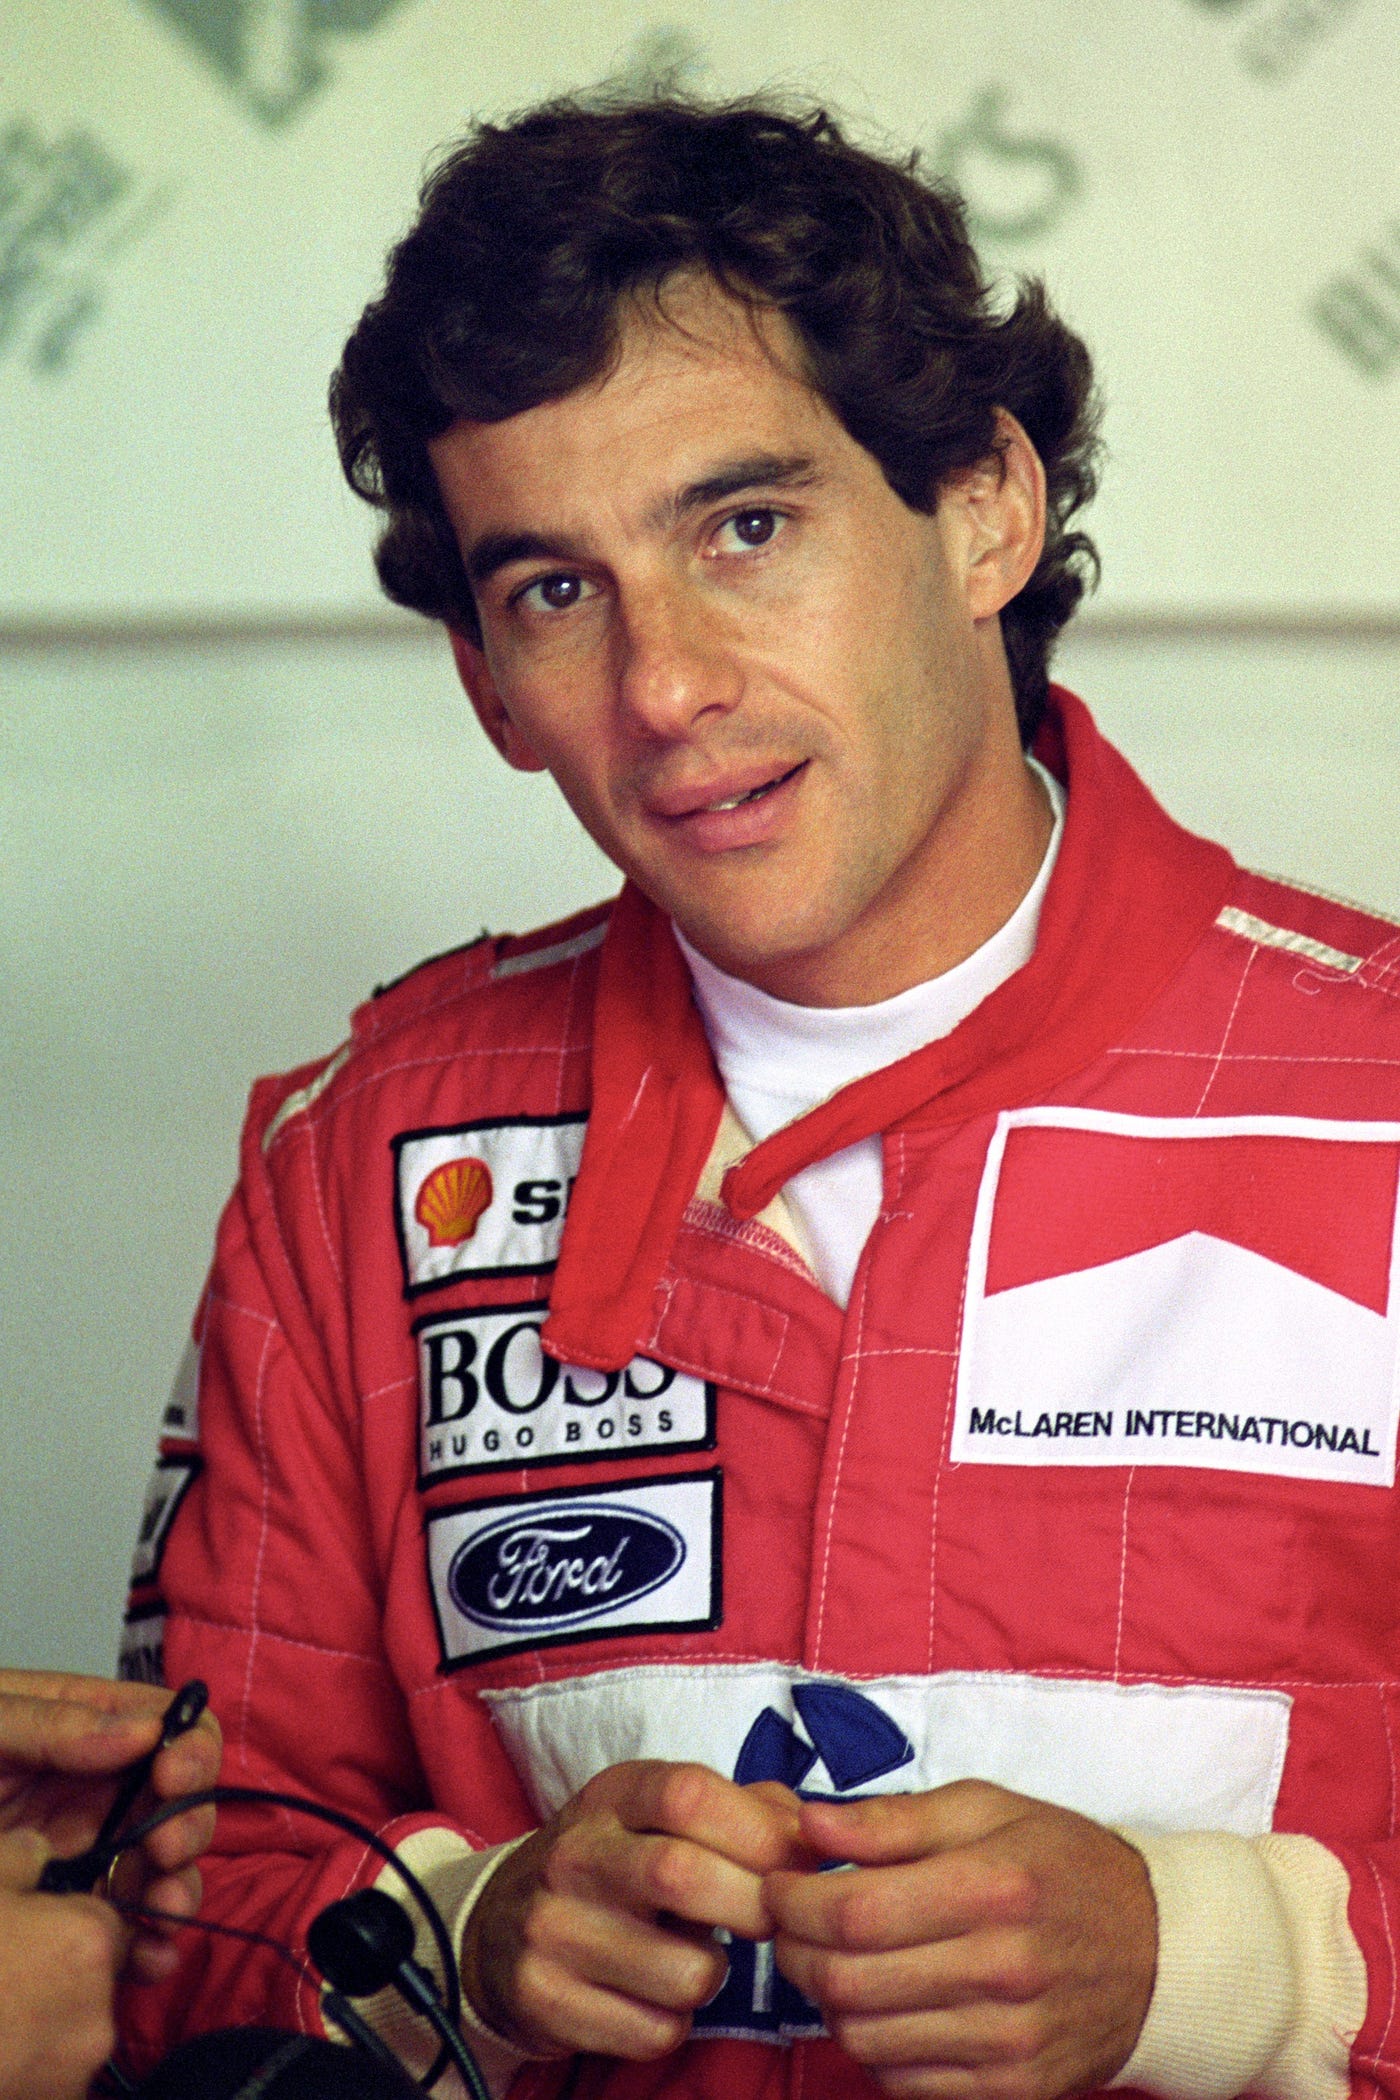 The Day Ayrton Senna Died and How I Remember It, by Carlos Gonzalez, Formula One Forever